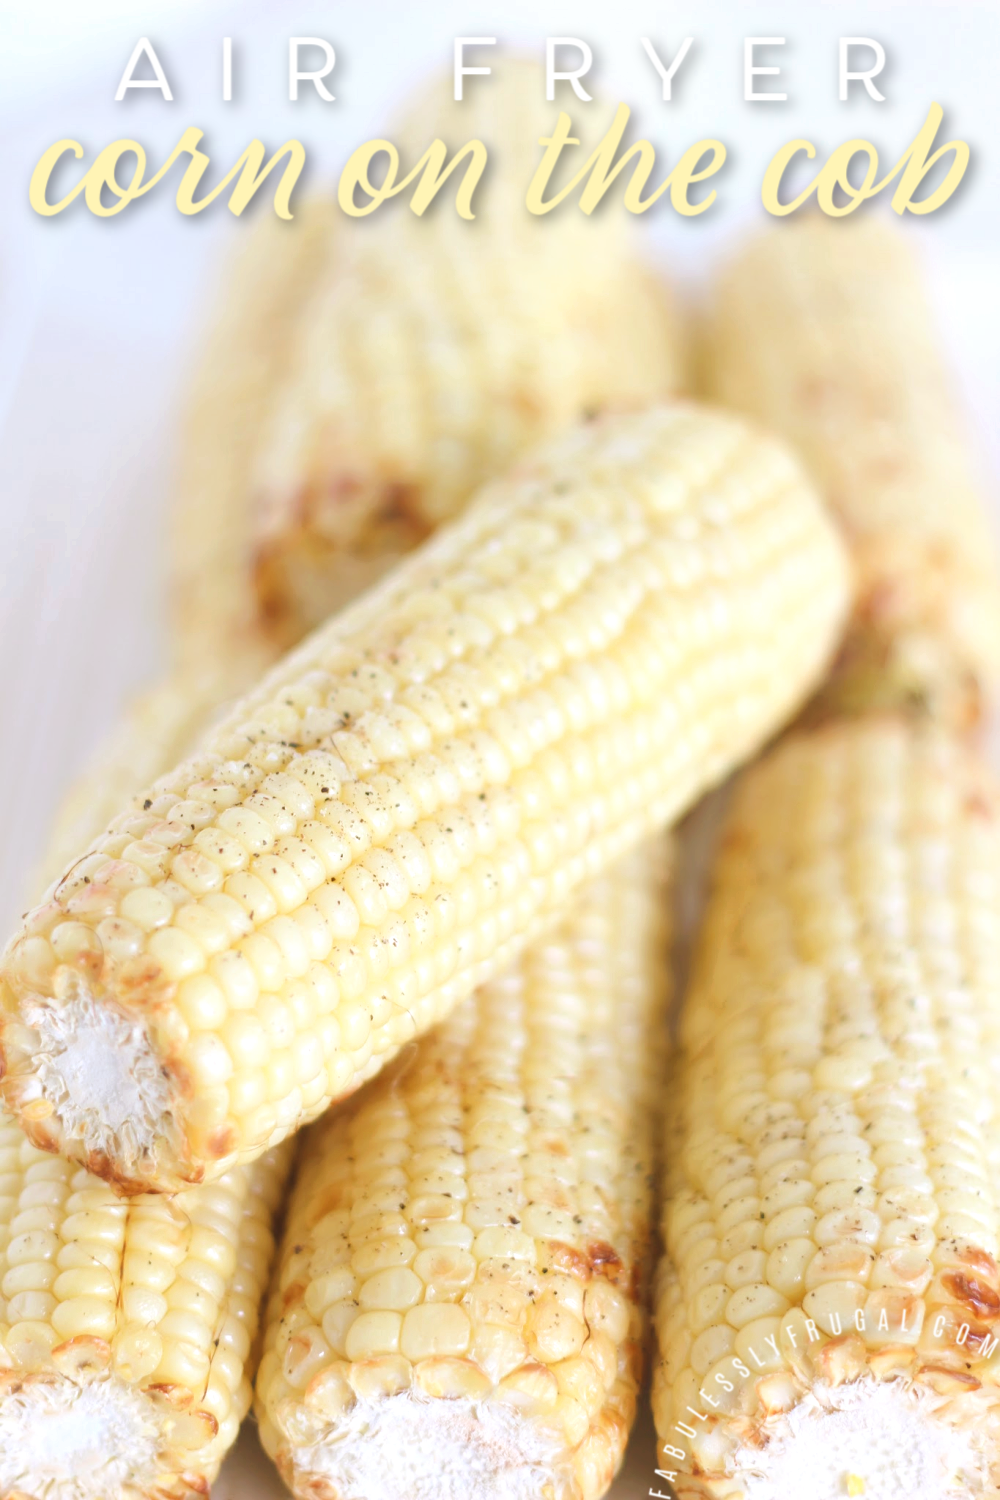 Stacks of fried corn on the cob